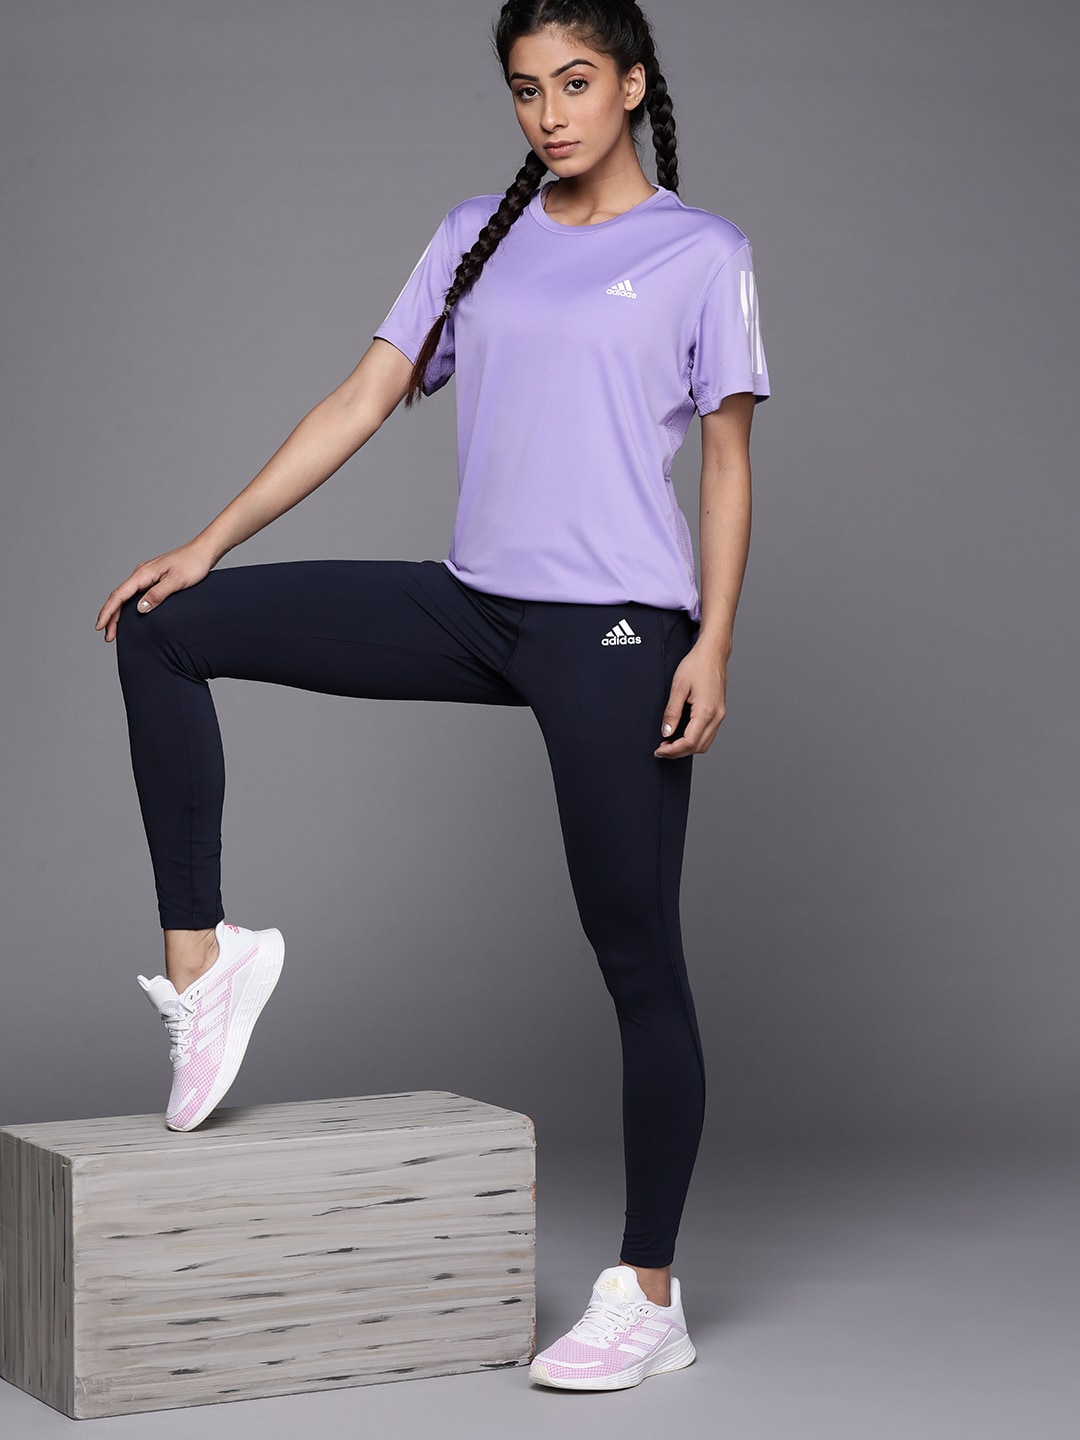 ADIDAS Women Lavender Own The Run Solid Aeroready Running T-shirt Price in India